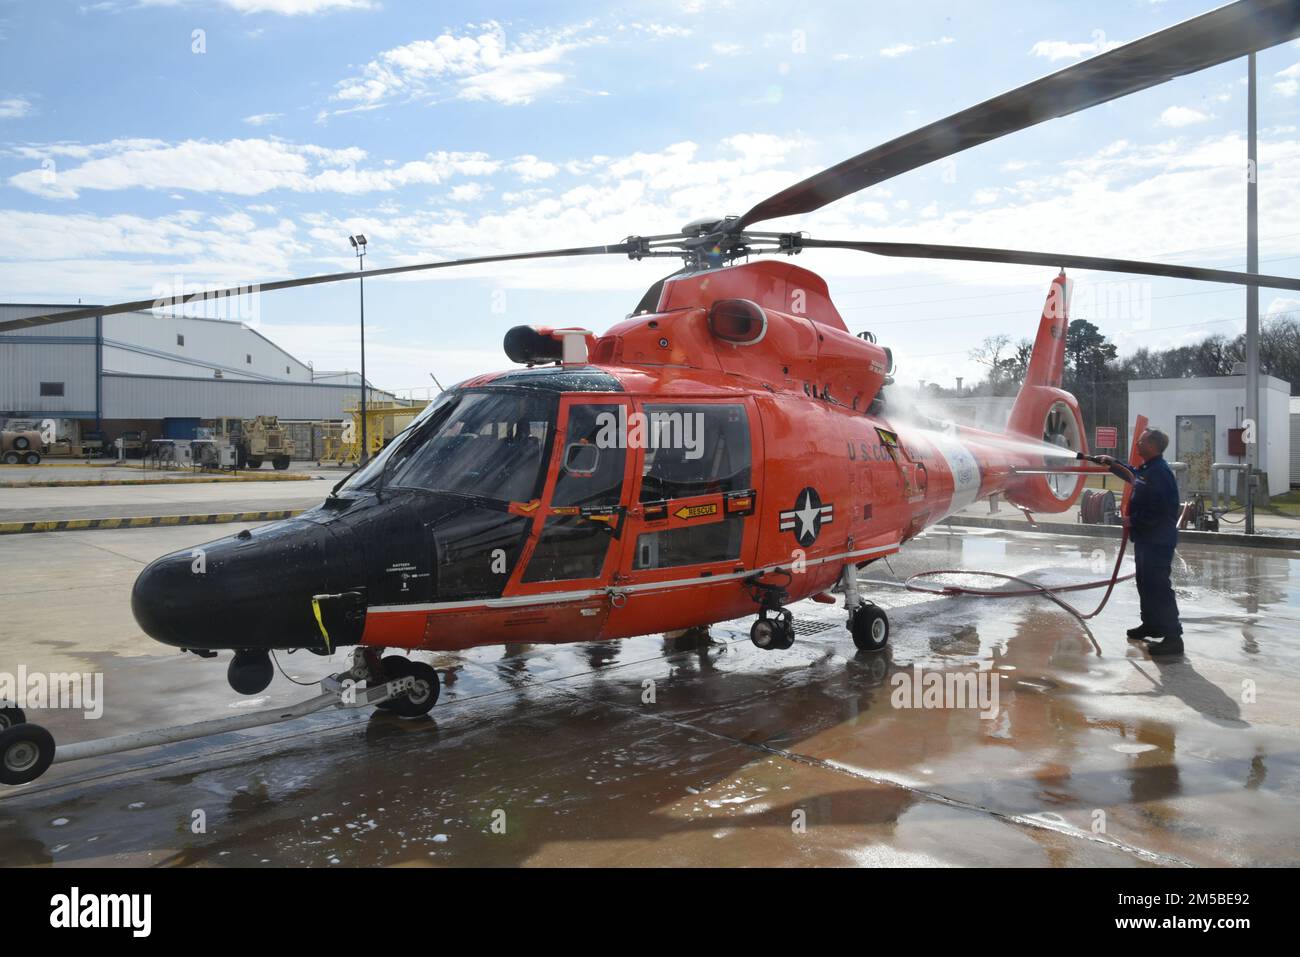 U.S. Coast Guard Petty Officer 1st Class Justin Caristo, an aviation maintenance technician assigned to the aviation engineering department at Coast Guard Air Station Savannah, Georgia, provides a fresh water wash to an MH-65 dolphin helicopter, Feb. 21, 2022. Air Station Savannah's area of responsibility cover approximately 450 miles of shoreline from the northern border of South Carolina to Melbourne, Florida. Stock Photo